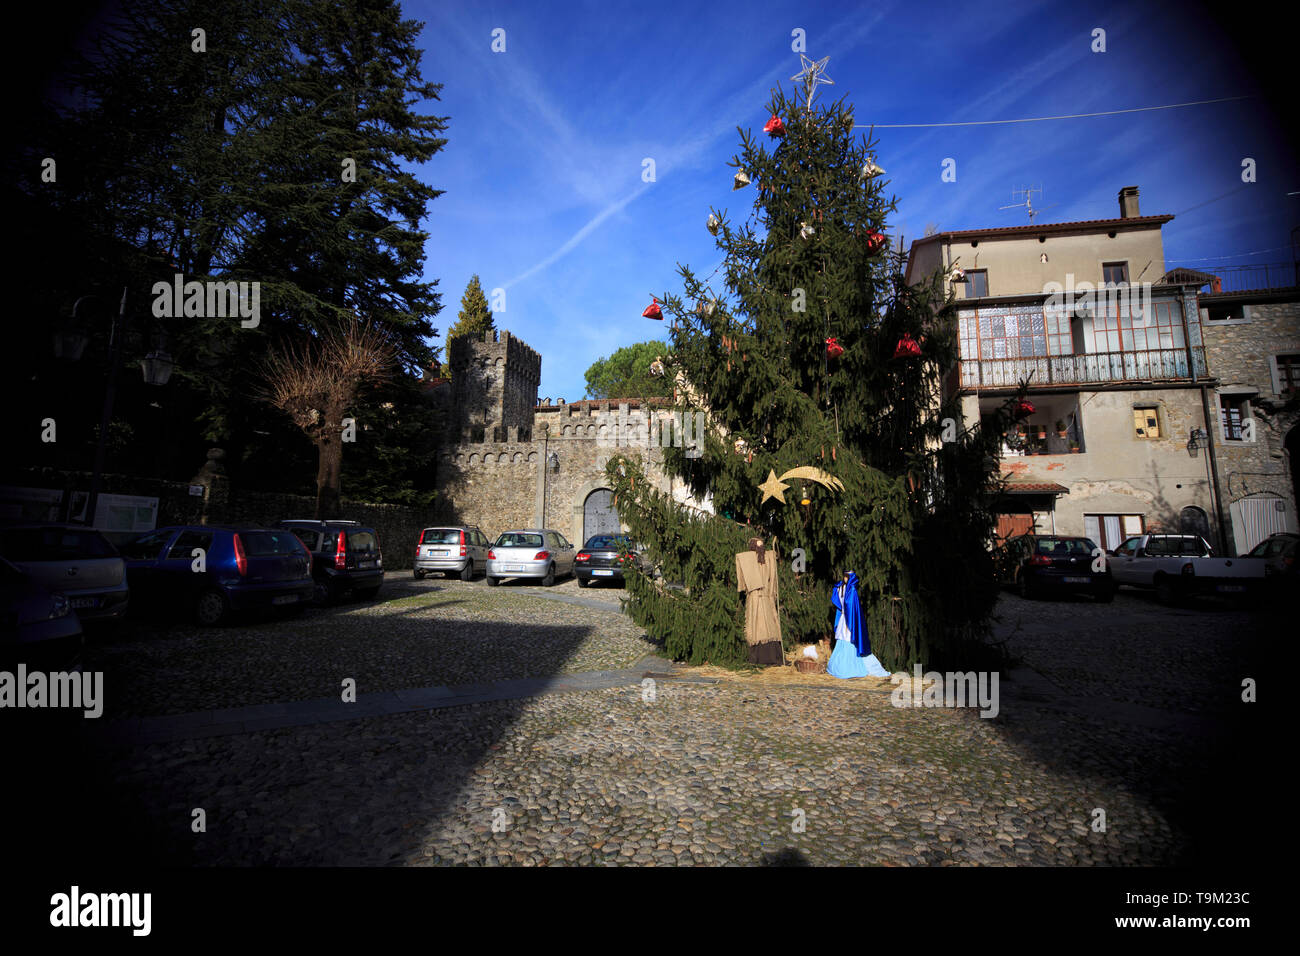 Lunigiana; Italy December 29, 2012: a square in Lunigiana with Christmas tree and some cars parked. In Lunigiana there are many medieval towns Stock Photo